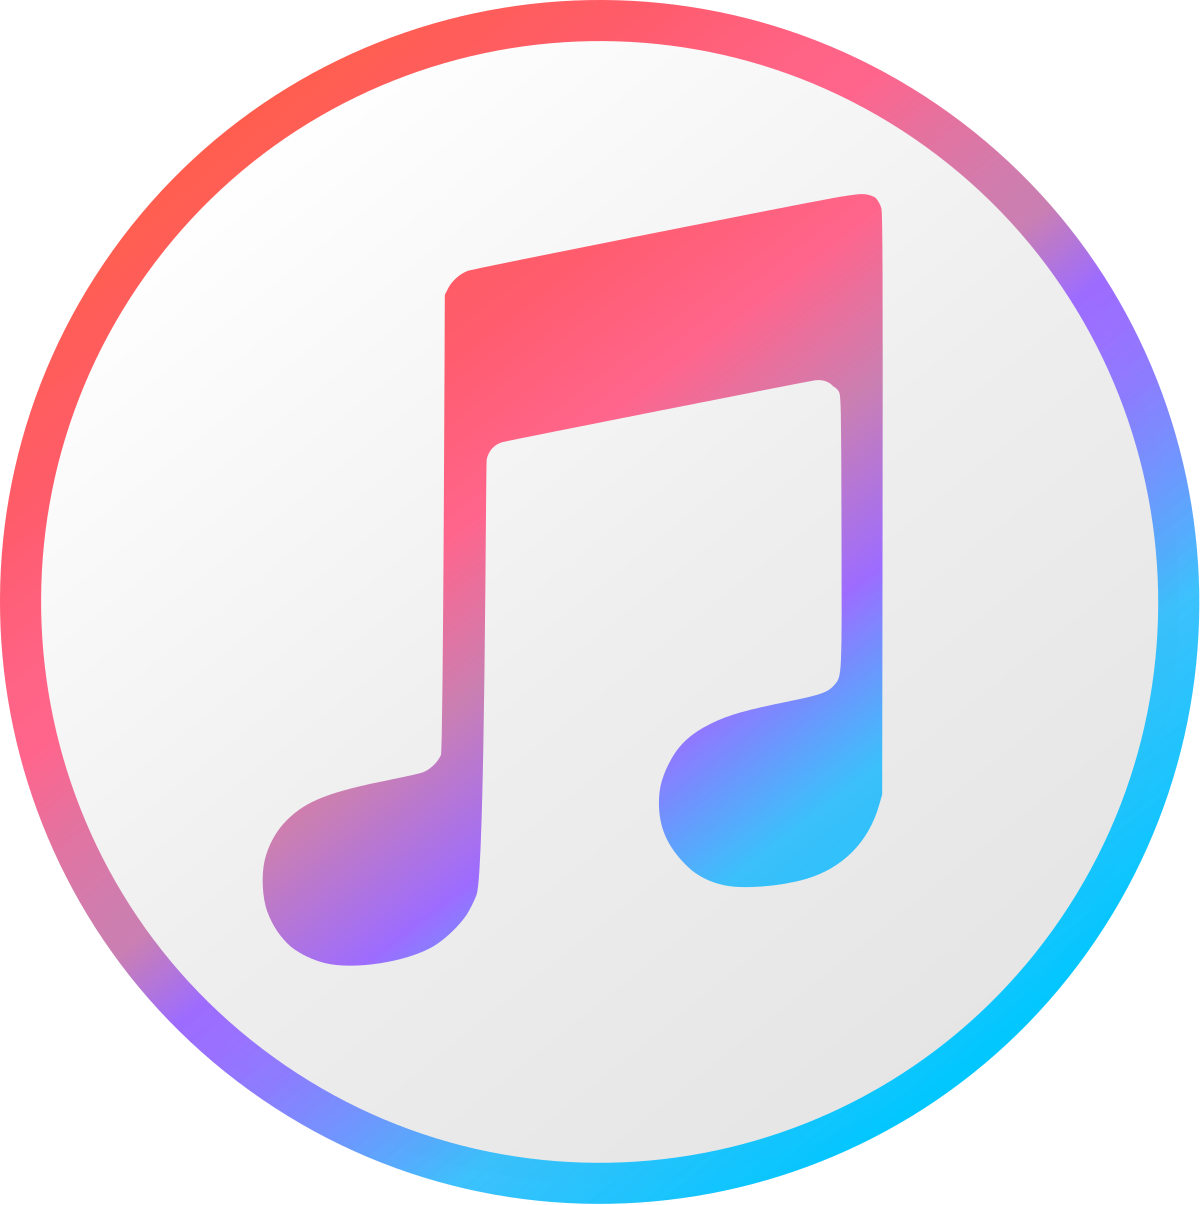 iTunes background processes and applications